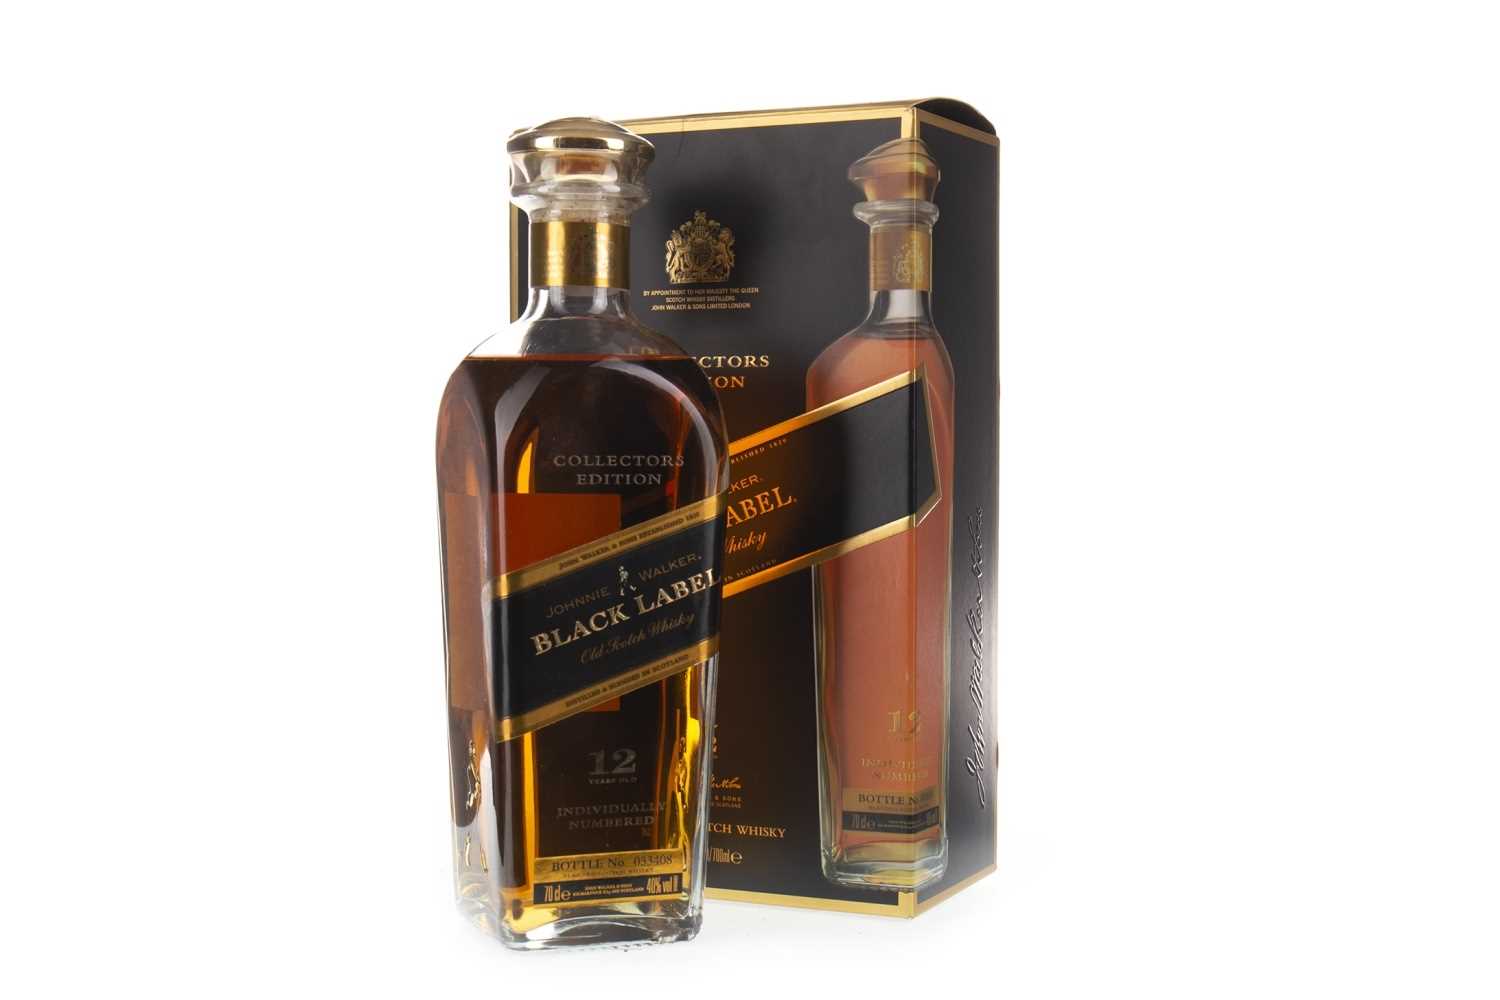 Lot 408 - JOHNNIE WALKER BLACK LABEL COLLECTORS EDITION AGED 12 YEARS